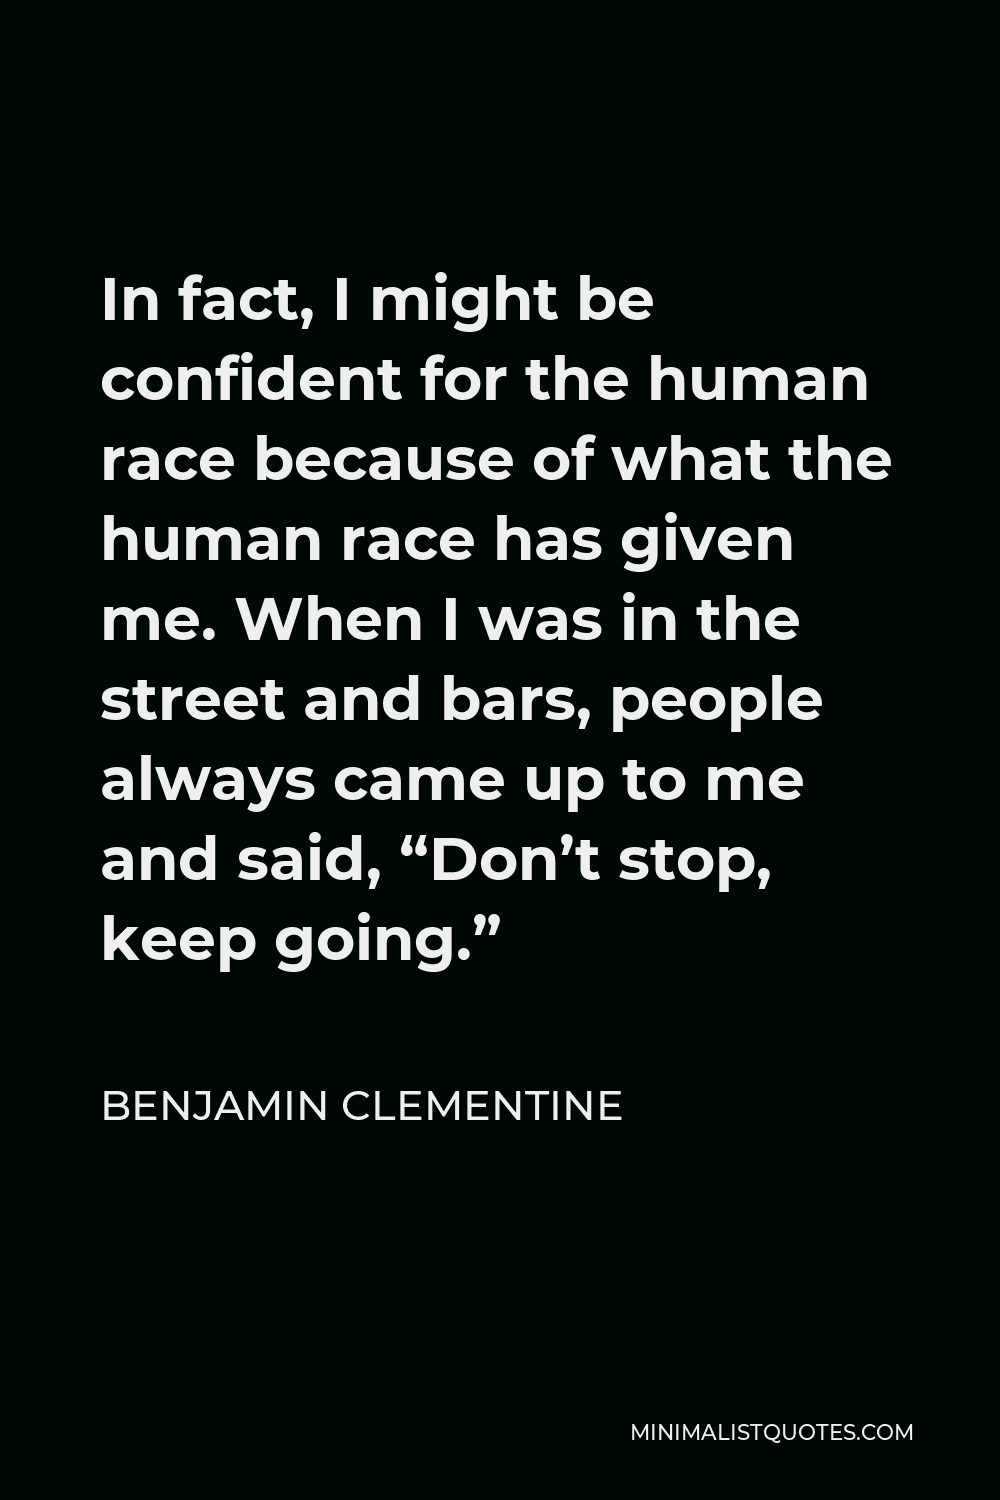 Benjamin Clementine Quote - In fact, I might be confident for the human race because of what the human race has given me. When I was in the street and bars, people always came up to me and said, “Don’t stop, keep going.”